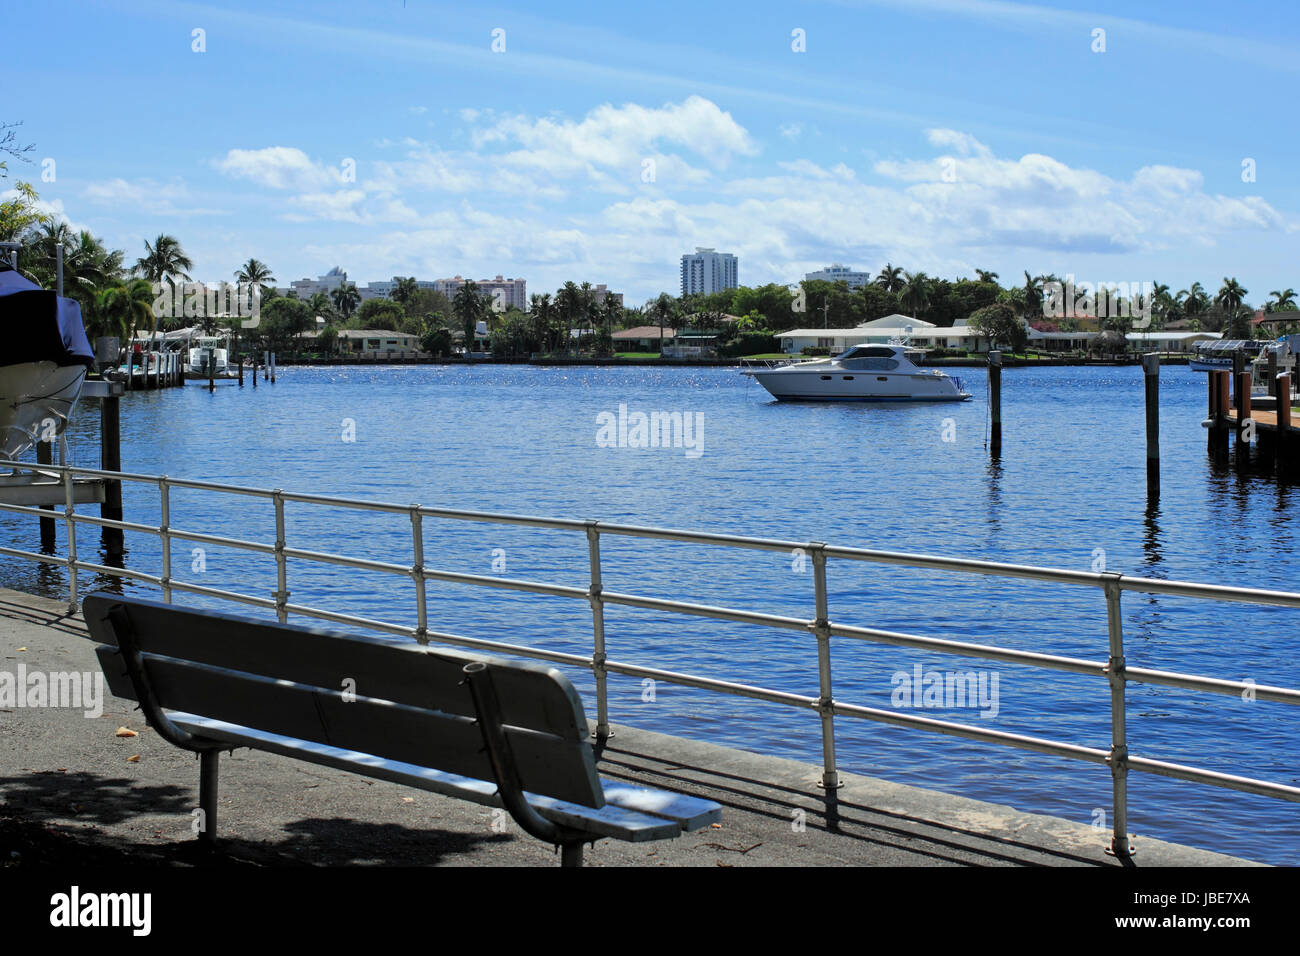 POMPANO BEACH, FLORIDA - MARCH 9, 2014: View of Lake Santa Barbara, previously known as Lettuce Lake, is where the boats in the Christmas parade turn around as it connects to the Intracoastal waterway Stock Photo